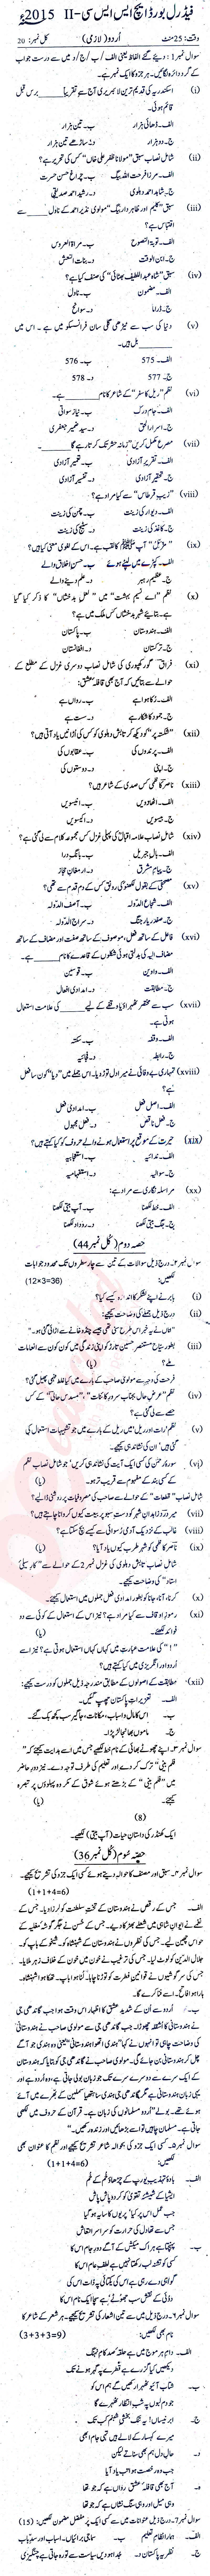 Urdu 12th class Past Paper Group 1 Federal BISE  2015